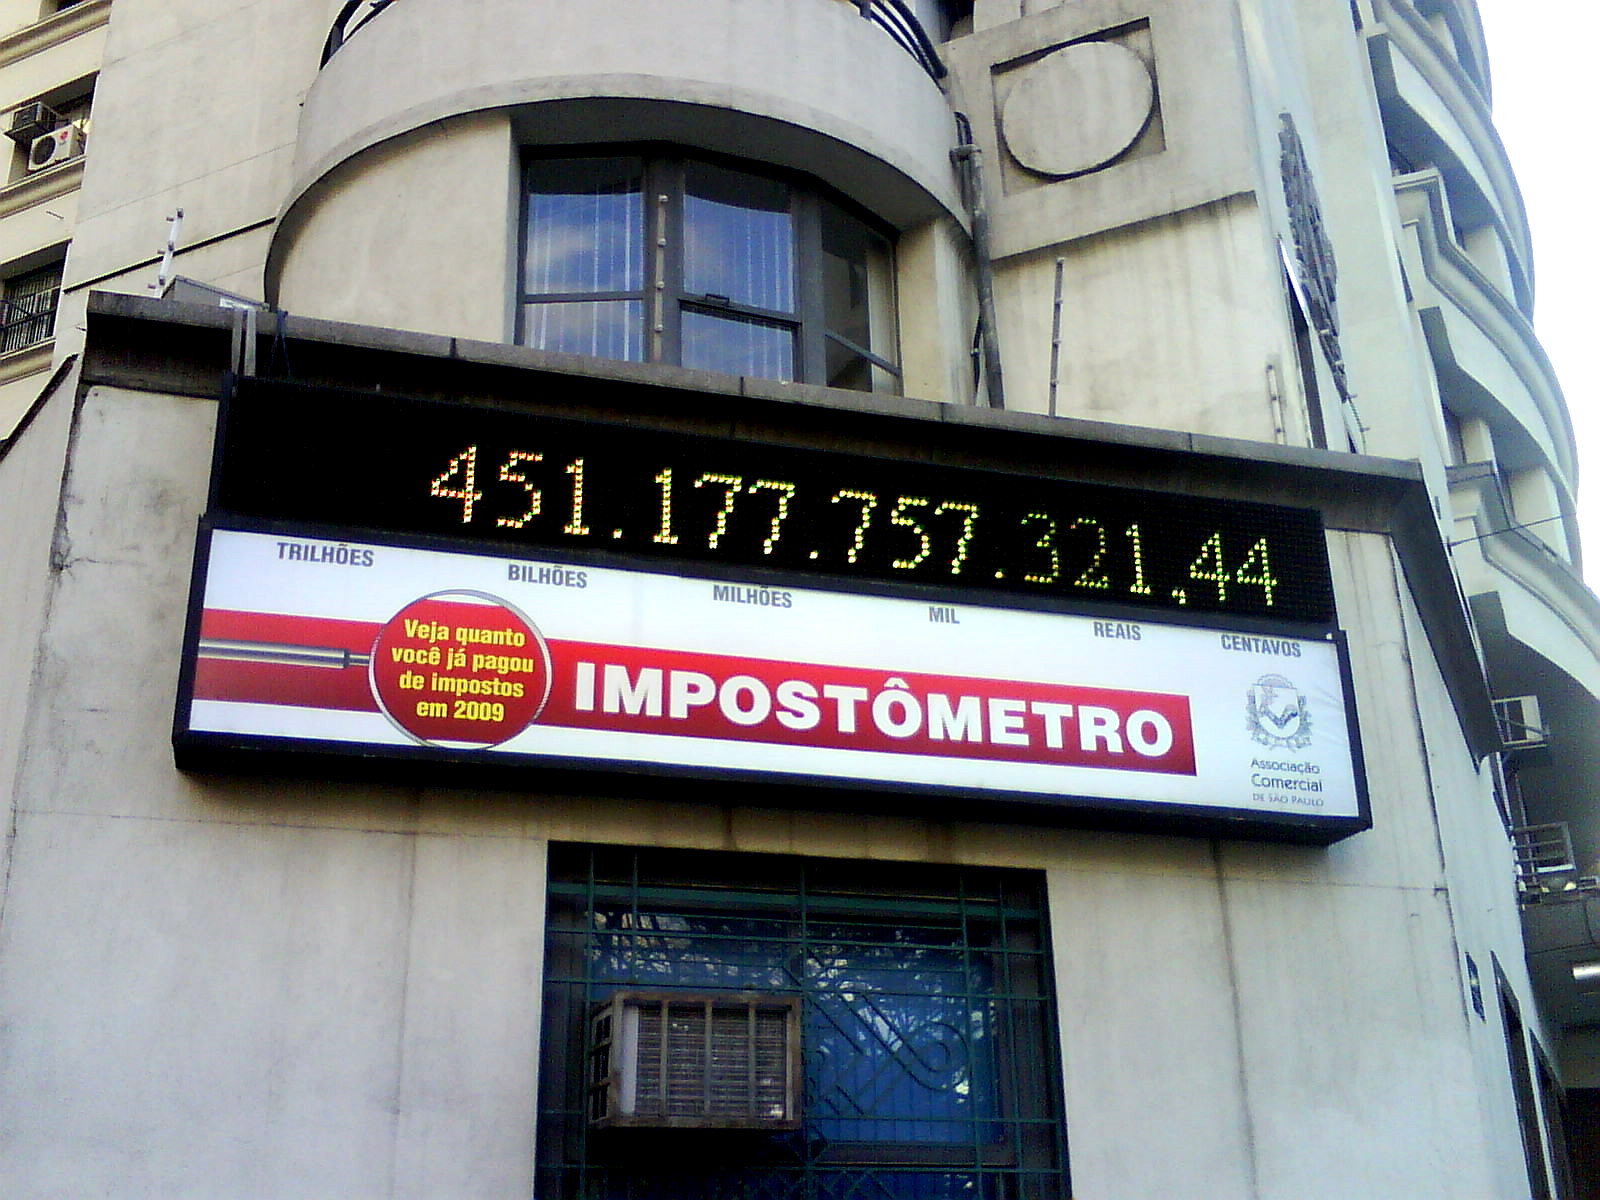 Impostômetro -  a counter showing how much in taxes were paid by brazilian people, Photo by Bruno Pedrozo on Flickr. CC BY 2.0